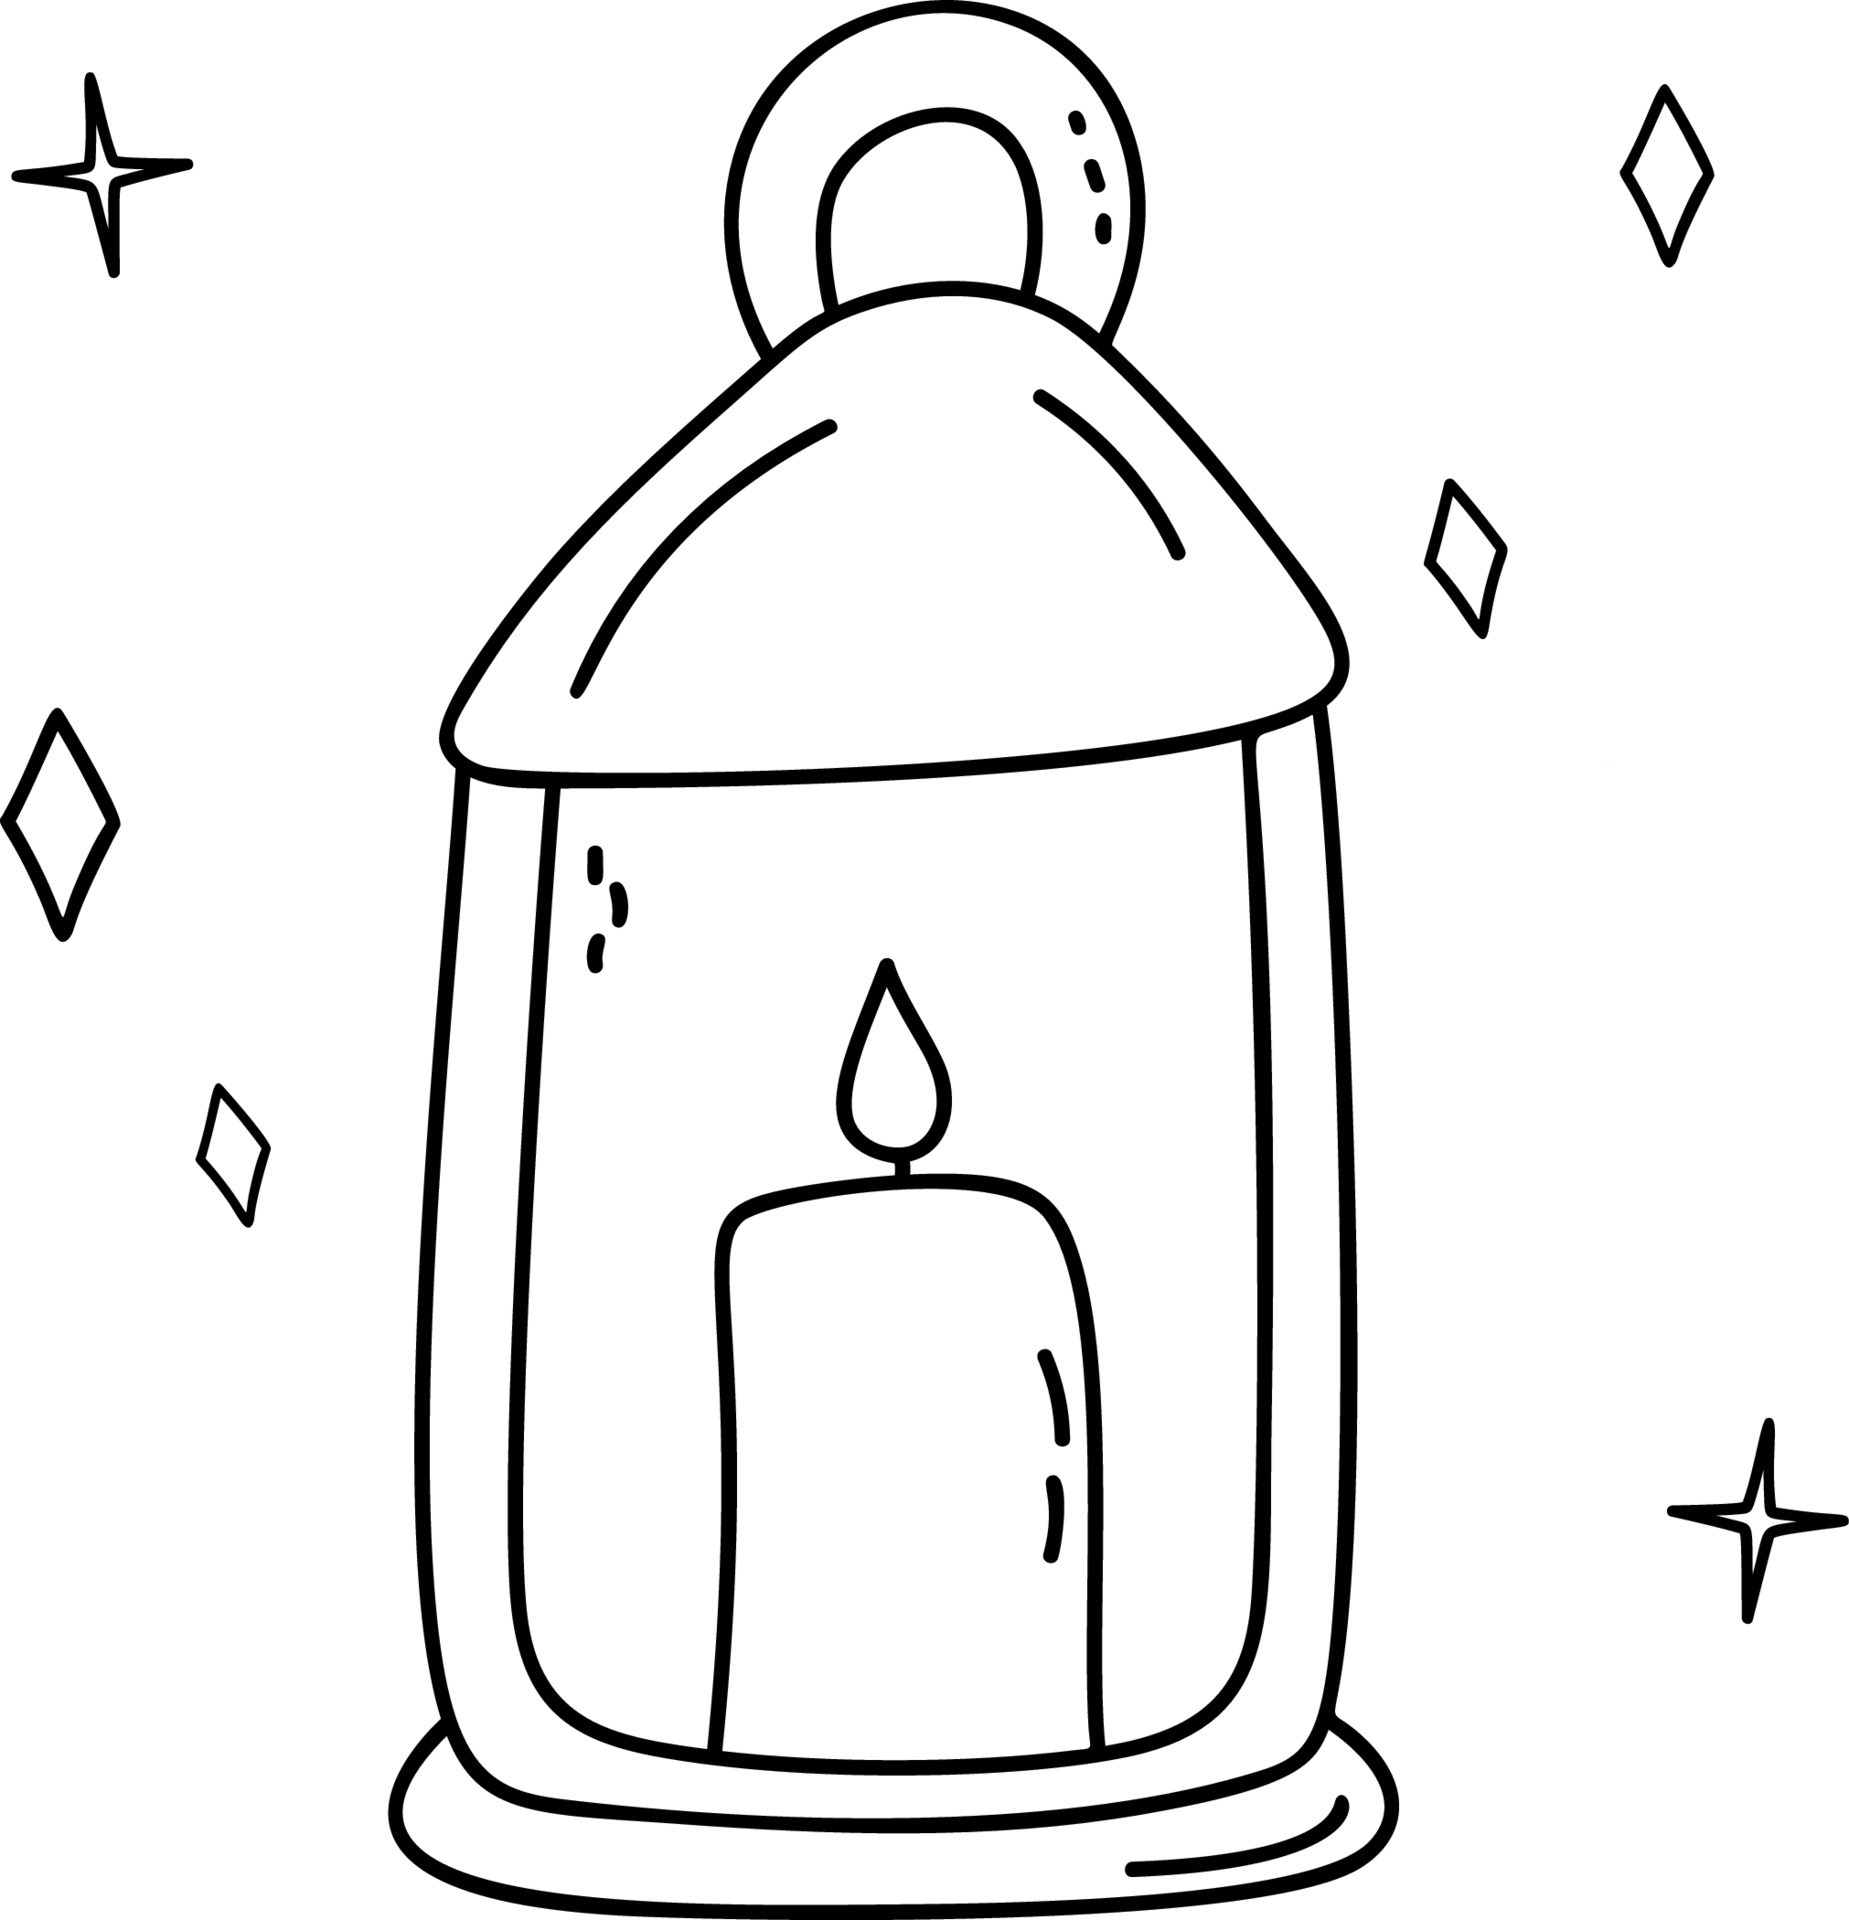 How to draw candle / LetsDrawIt